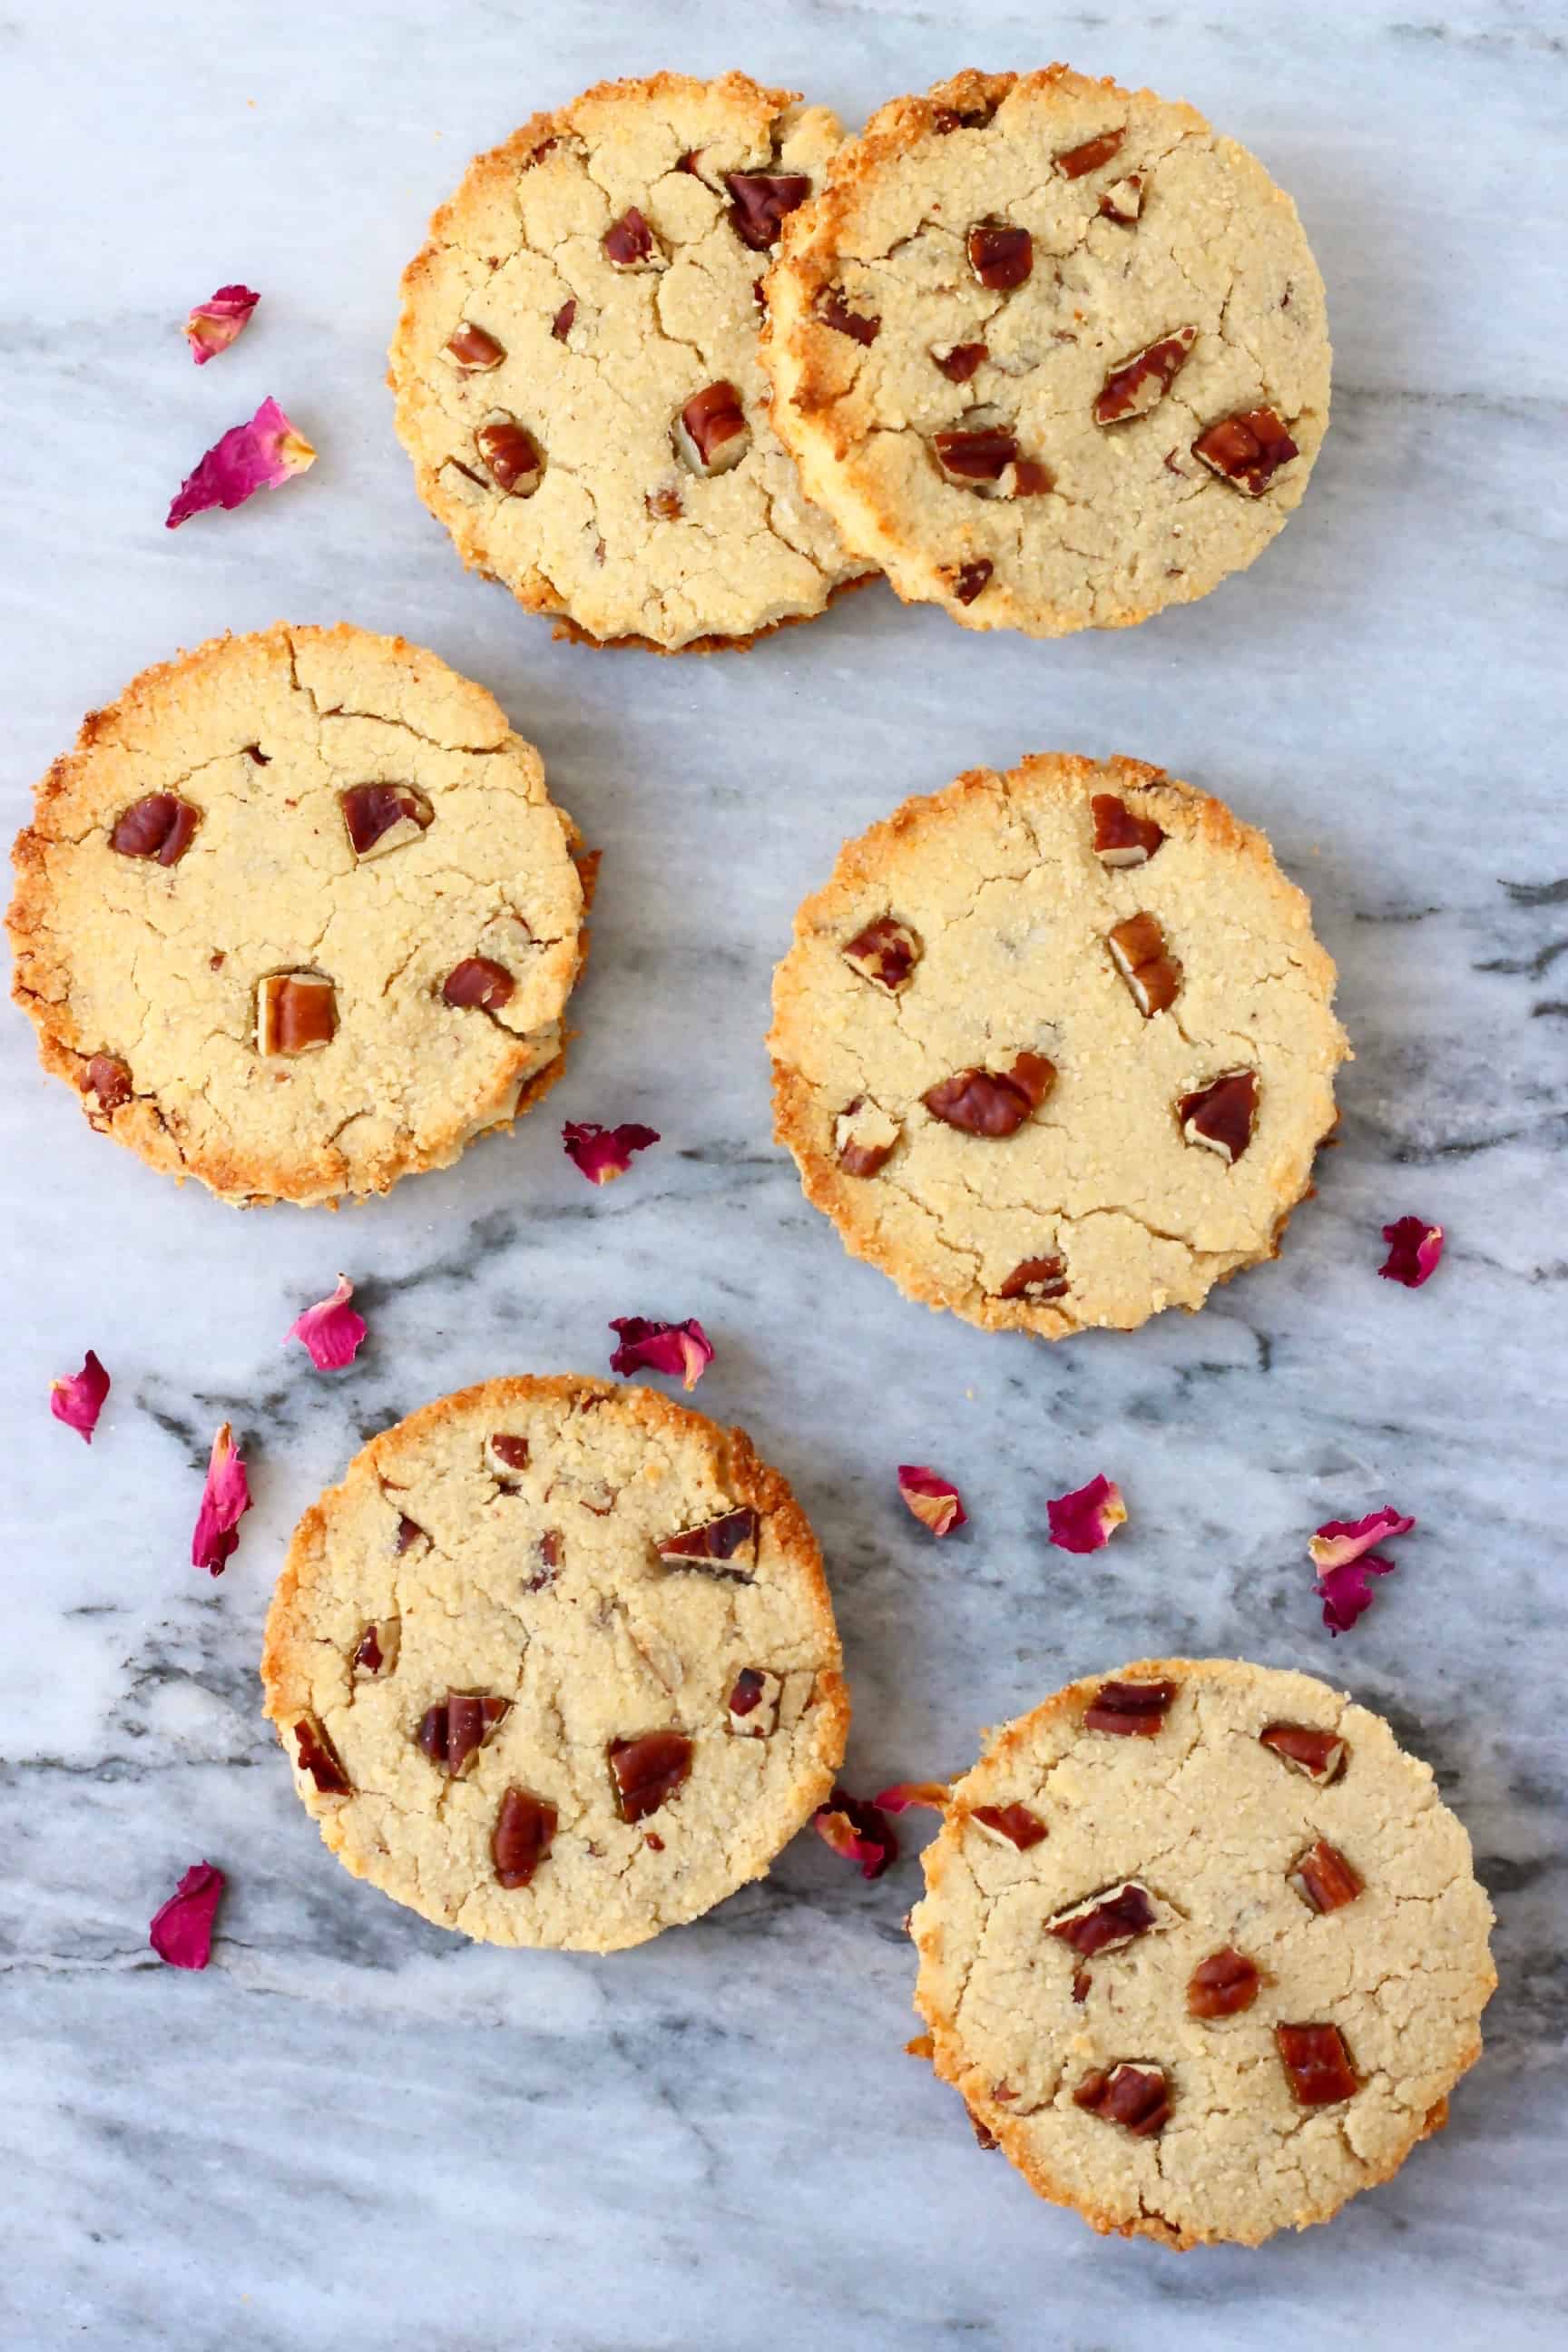 Six round coconut flour cookies with pecan nuts against a marble background scattered with rose petals